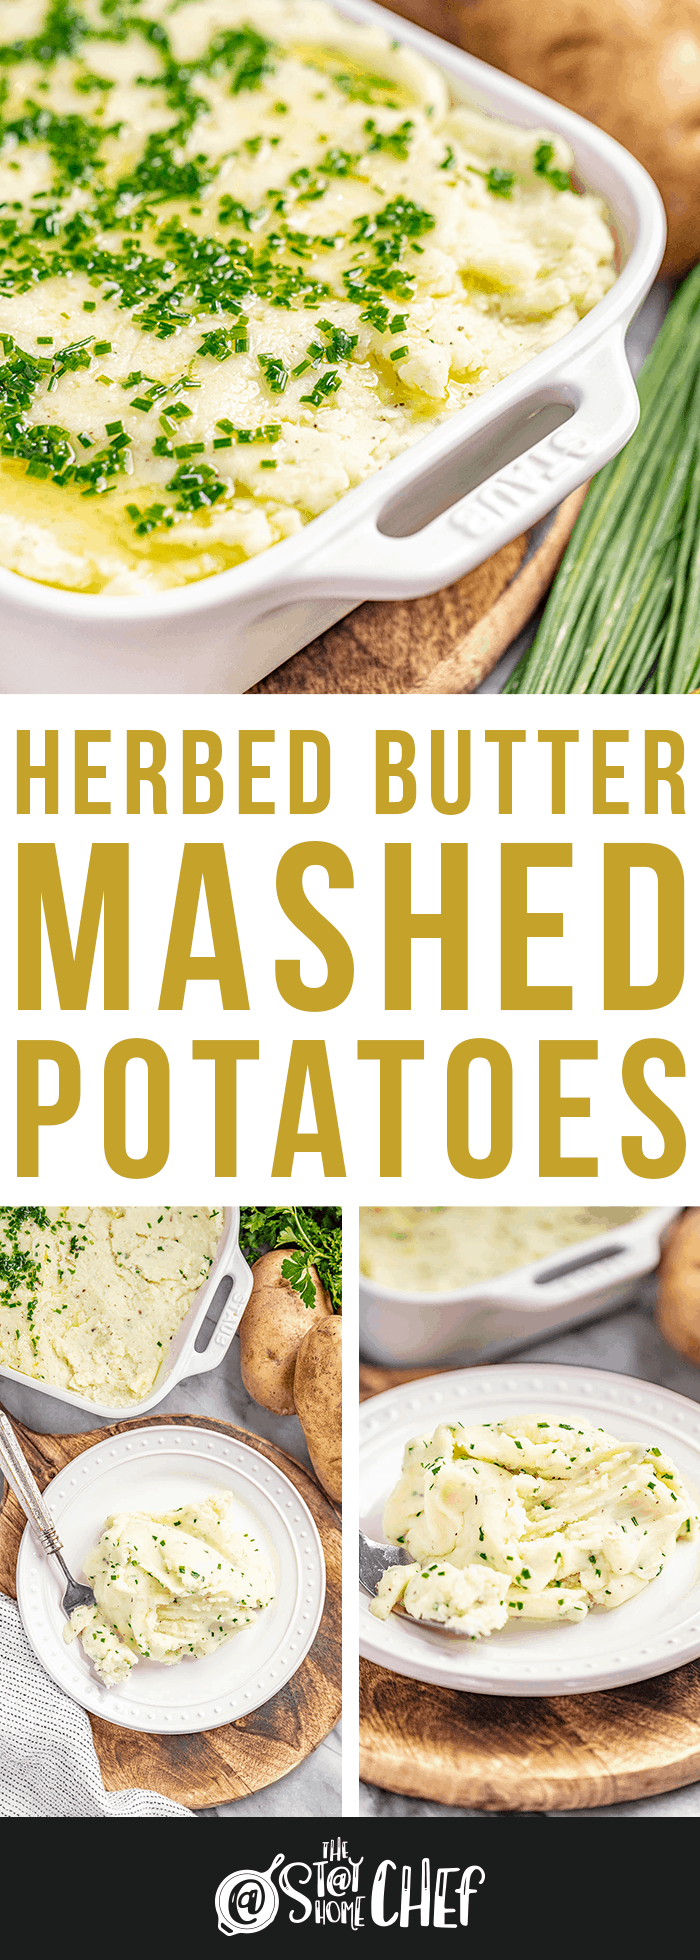 Herbed Butter Mashed Potatoes